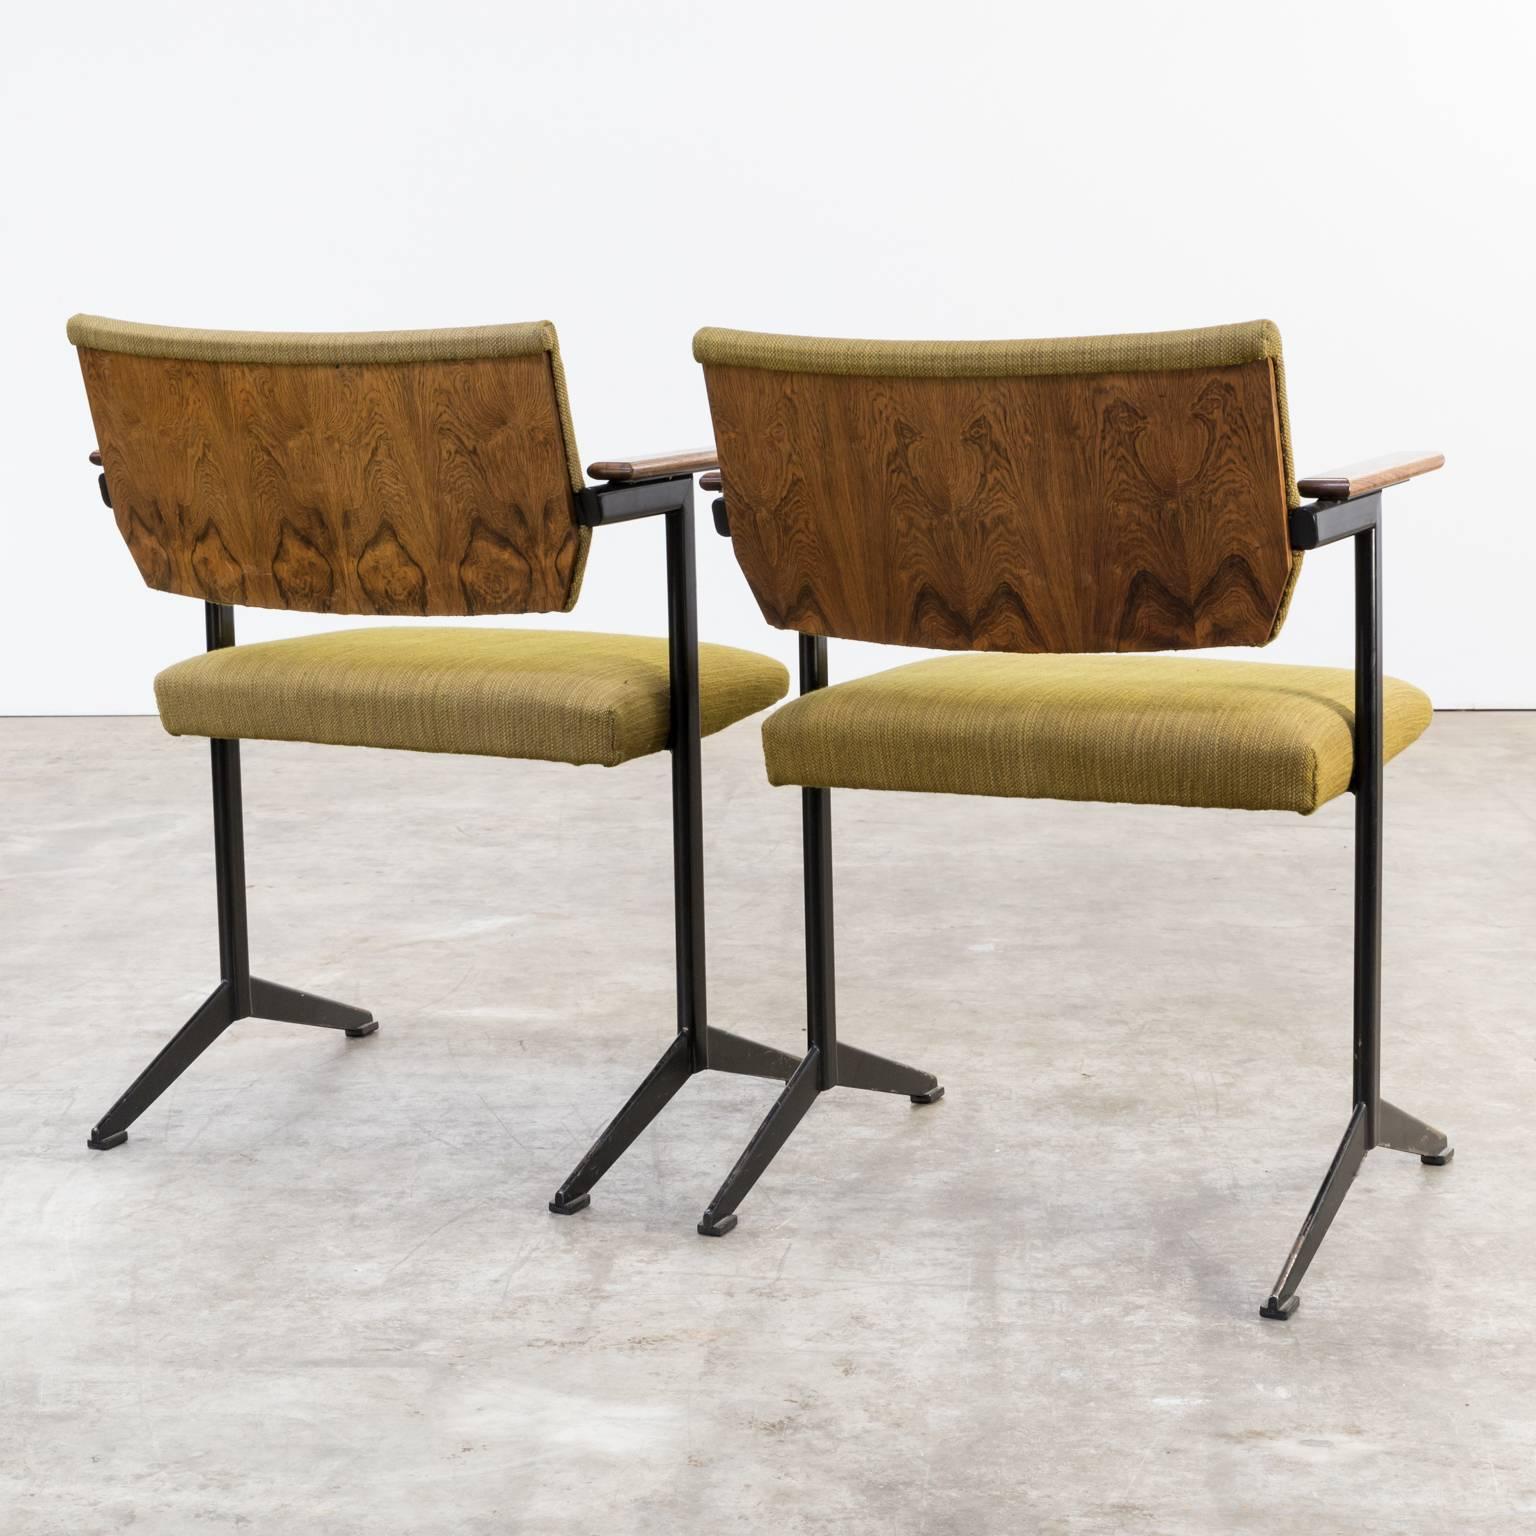 1960s Friso Kramer ‘Ariadne Series’ Chairs for Auping Set of Two In Good Condition For Sale In Amstelveen, Noord